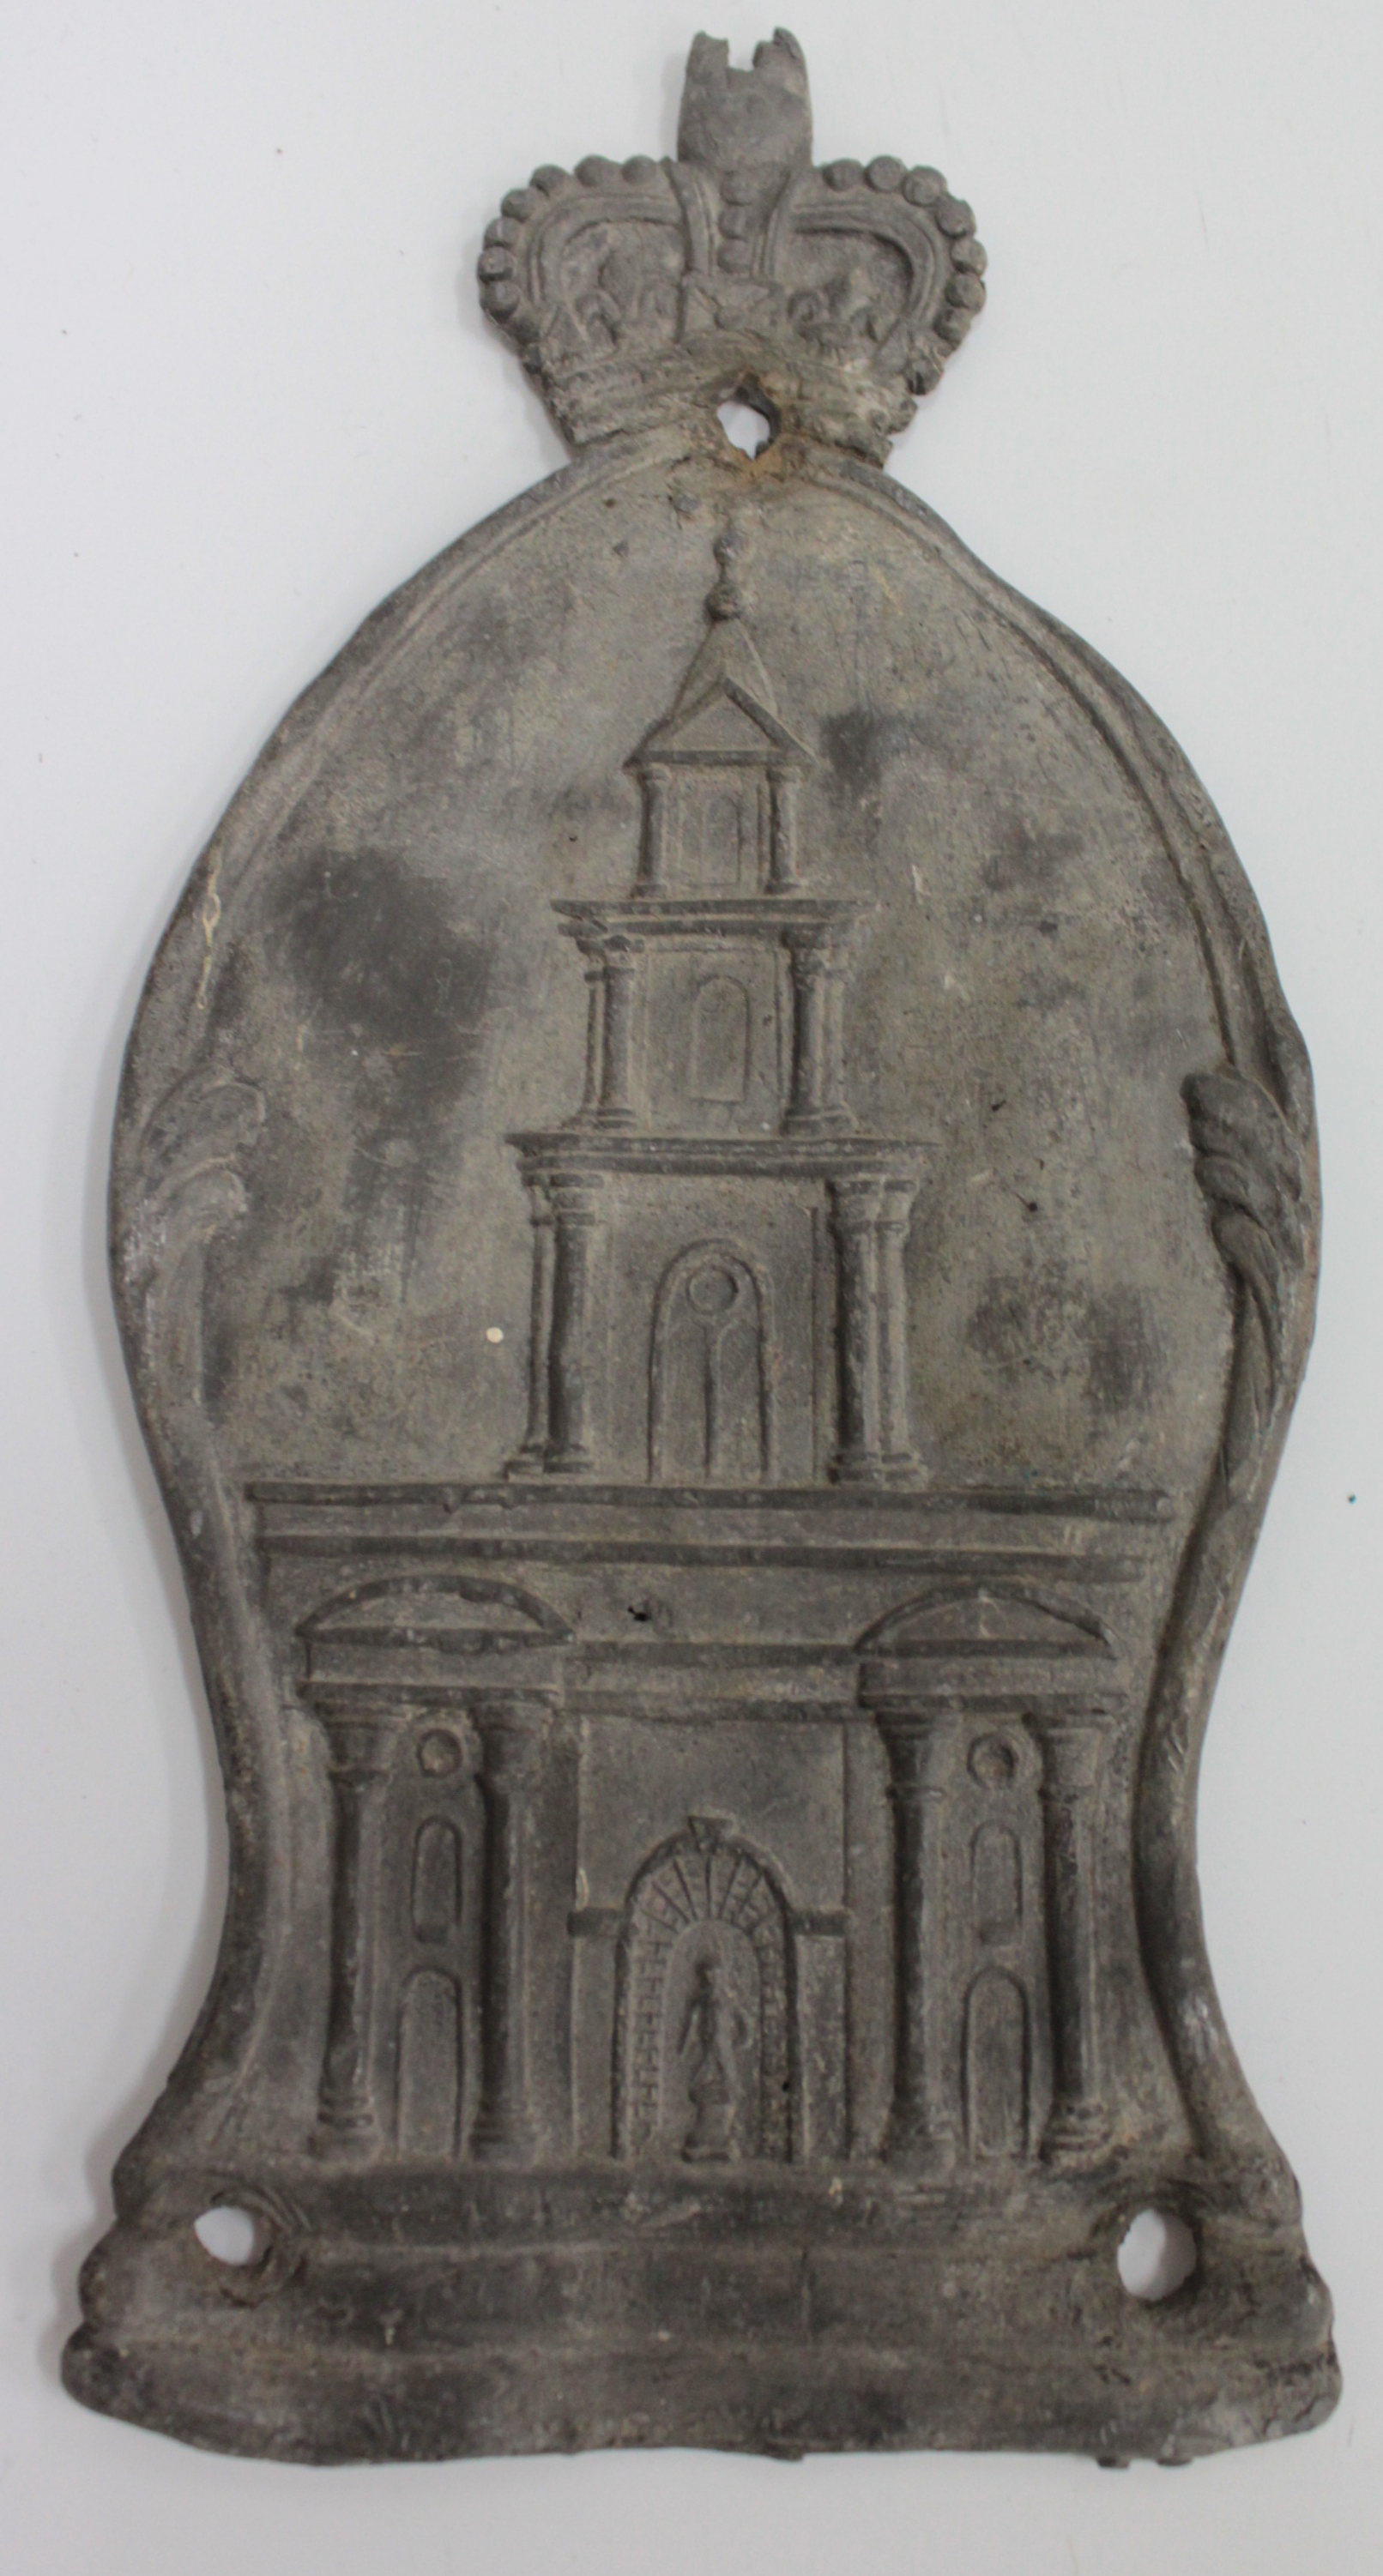 AN OLD LEAD PLAQUE possibly a fire mark with crown top and tiered classical building beneath, 22cm